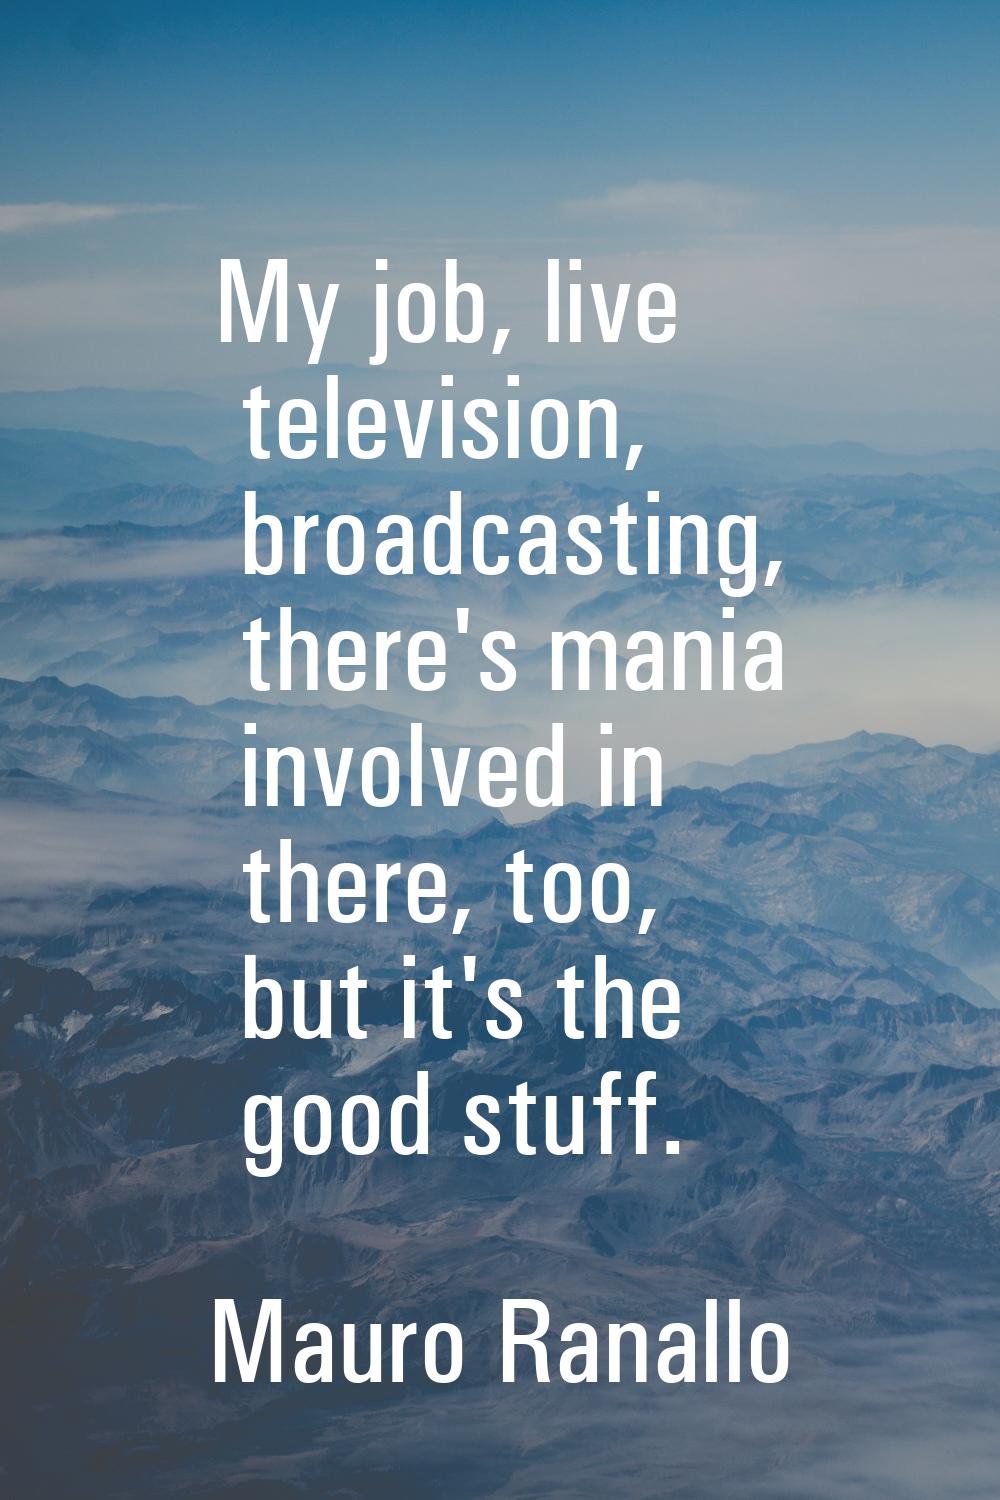 My job, live television, broadcasting, there's mania involved in there, too, but it's the good stuf